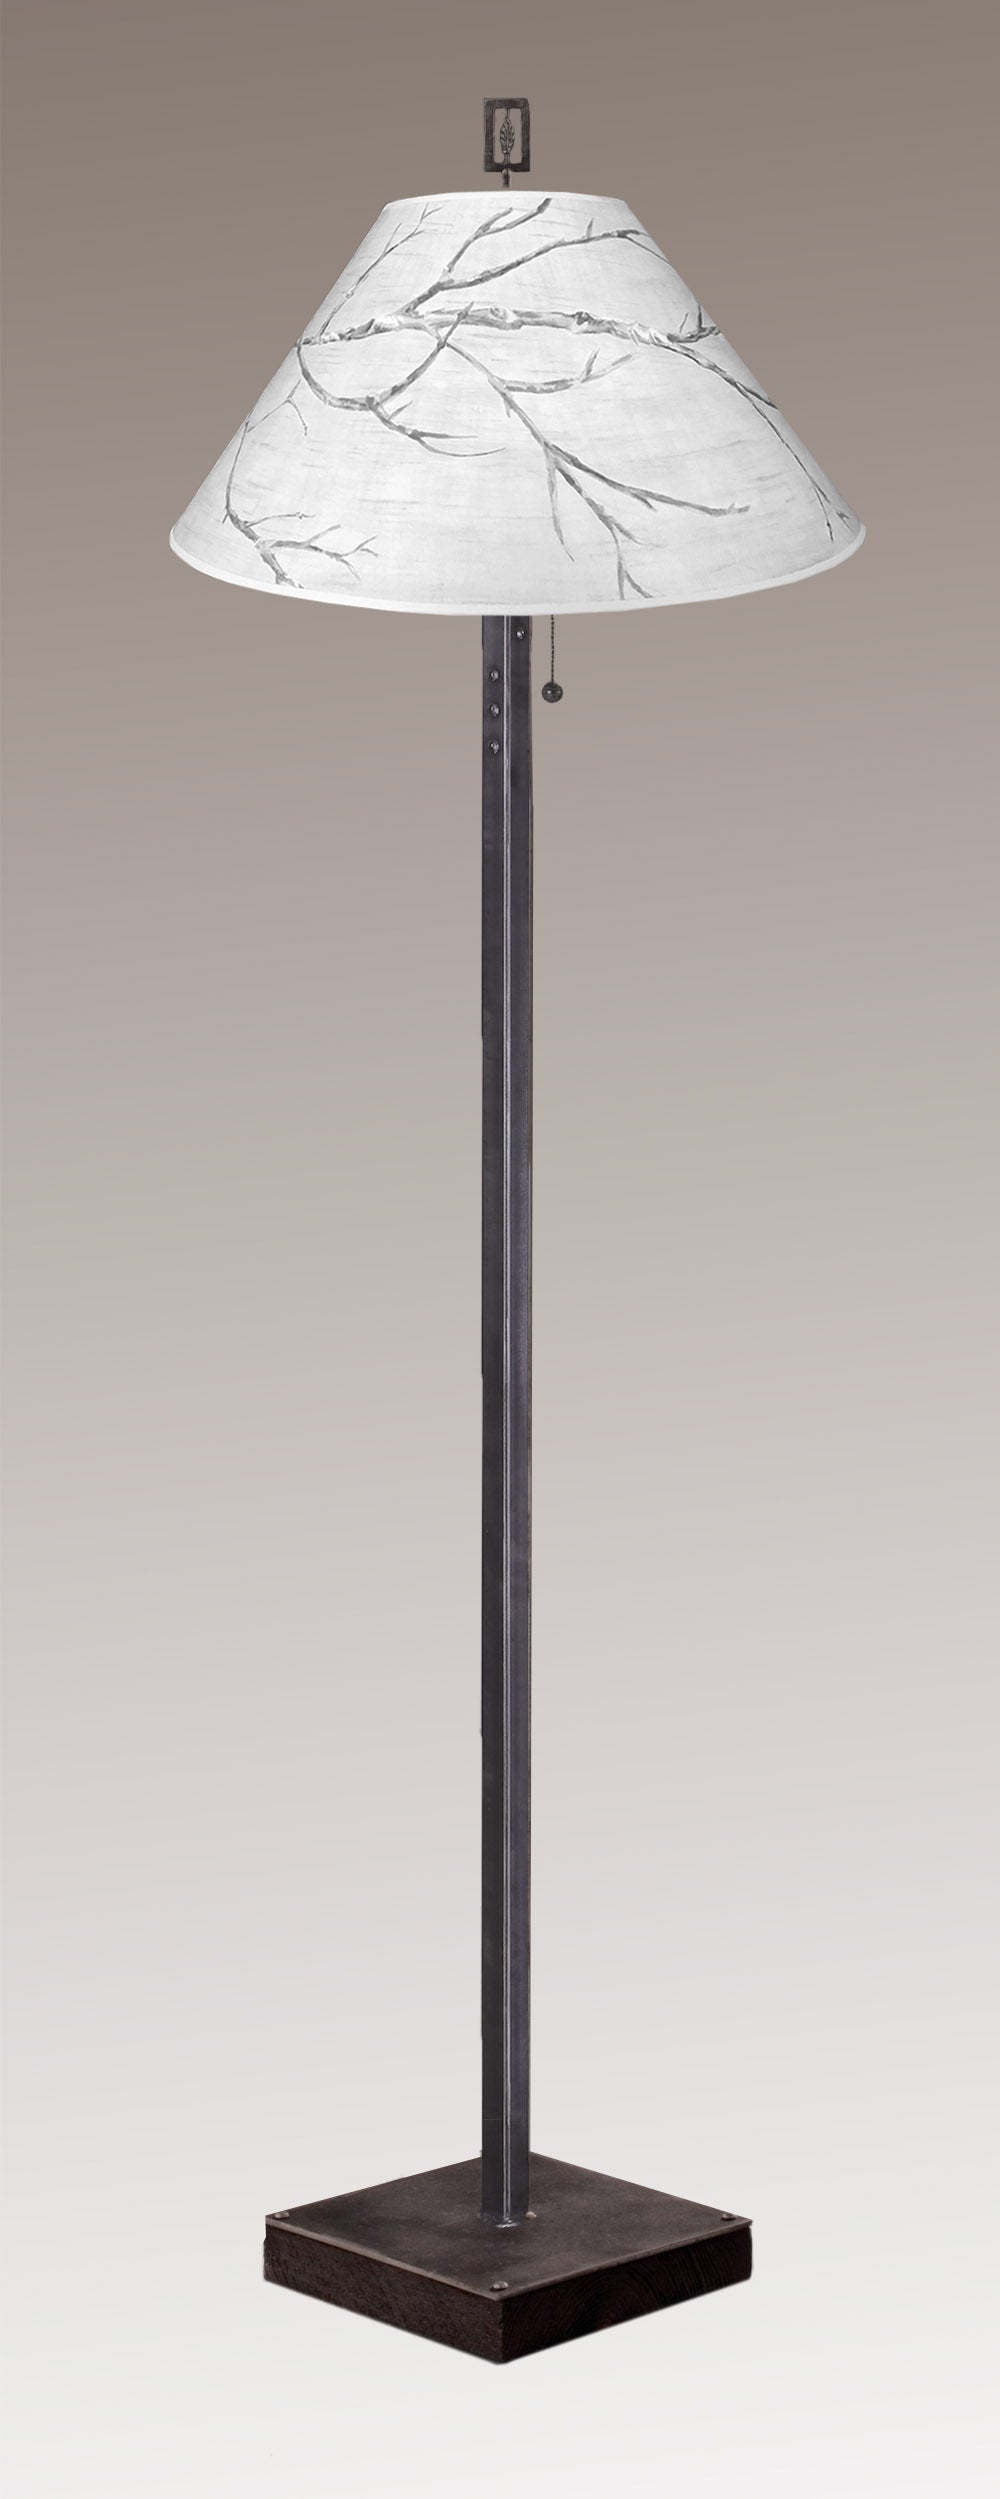 Janna Ugone &amp; Co Floor Lamps Steel Floor Lamp on  Reclaimed Wood with Large Conical Shade in Sweeping Branch